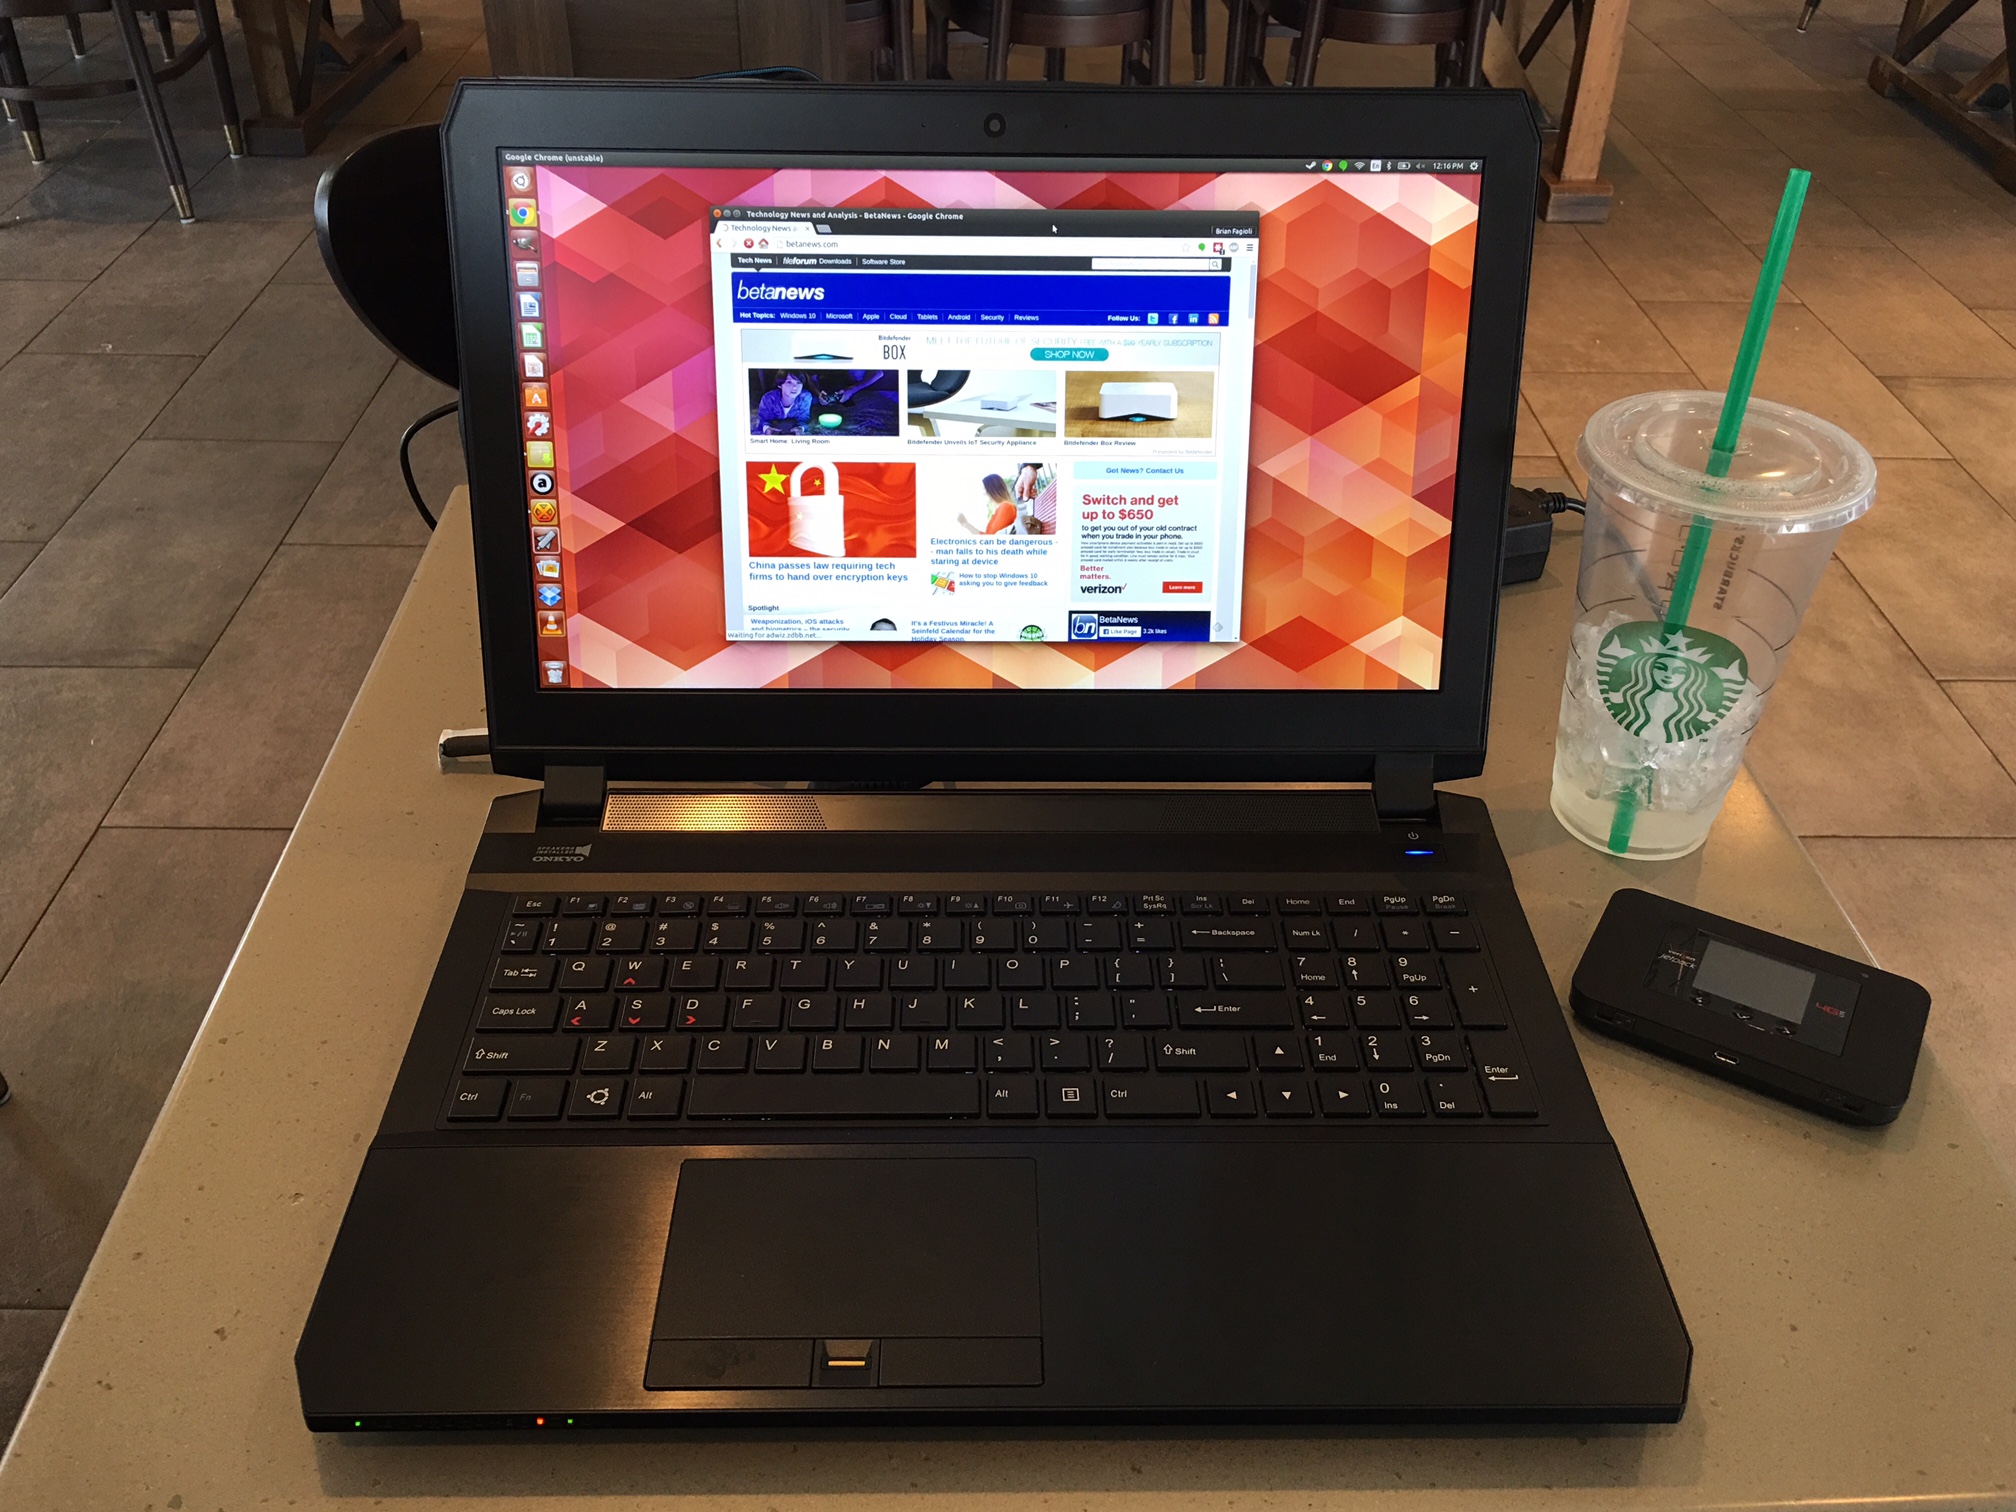 System76 Oryx Pro Ubuntu Linux gaming laptop of your dreams [Review] BetaNews